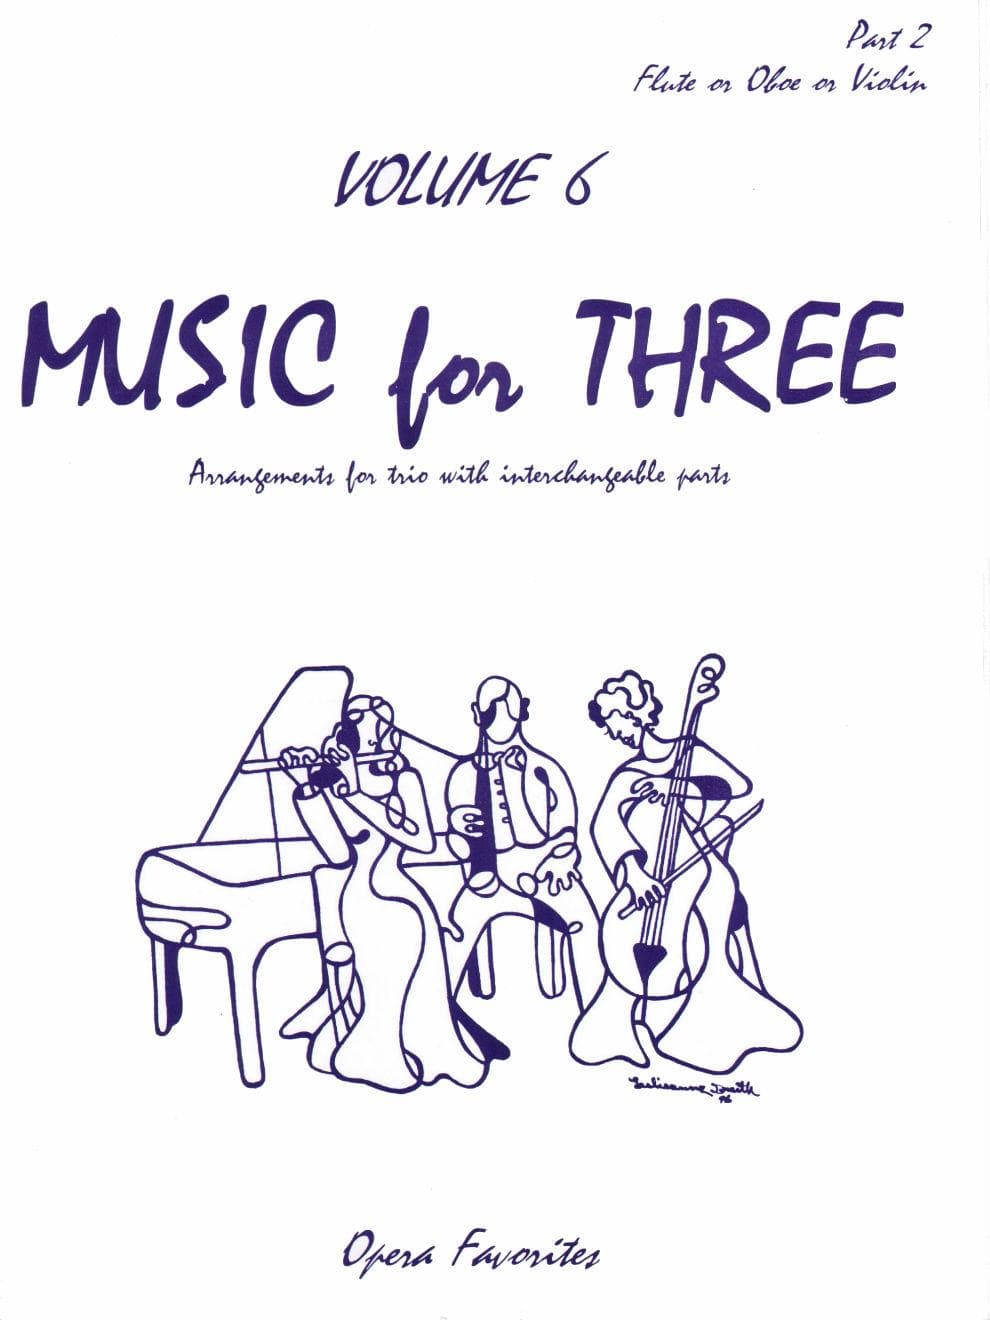 Music for Three Volume 6 Part 2, Violin, Oboe or Flute Published by Last Resort Music